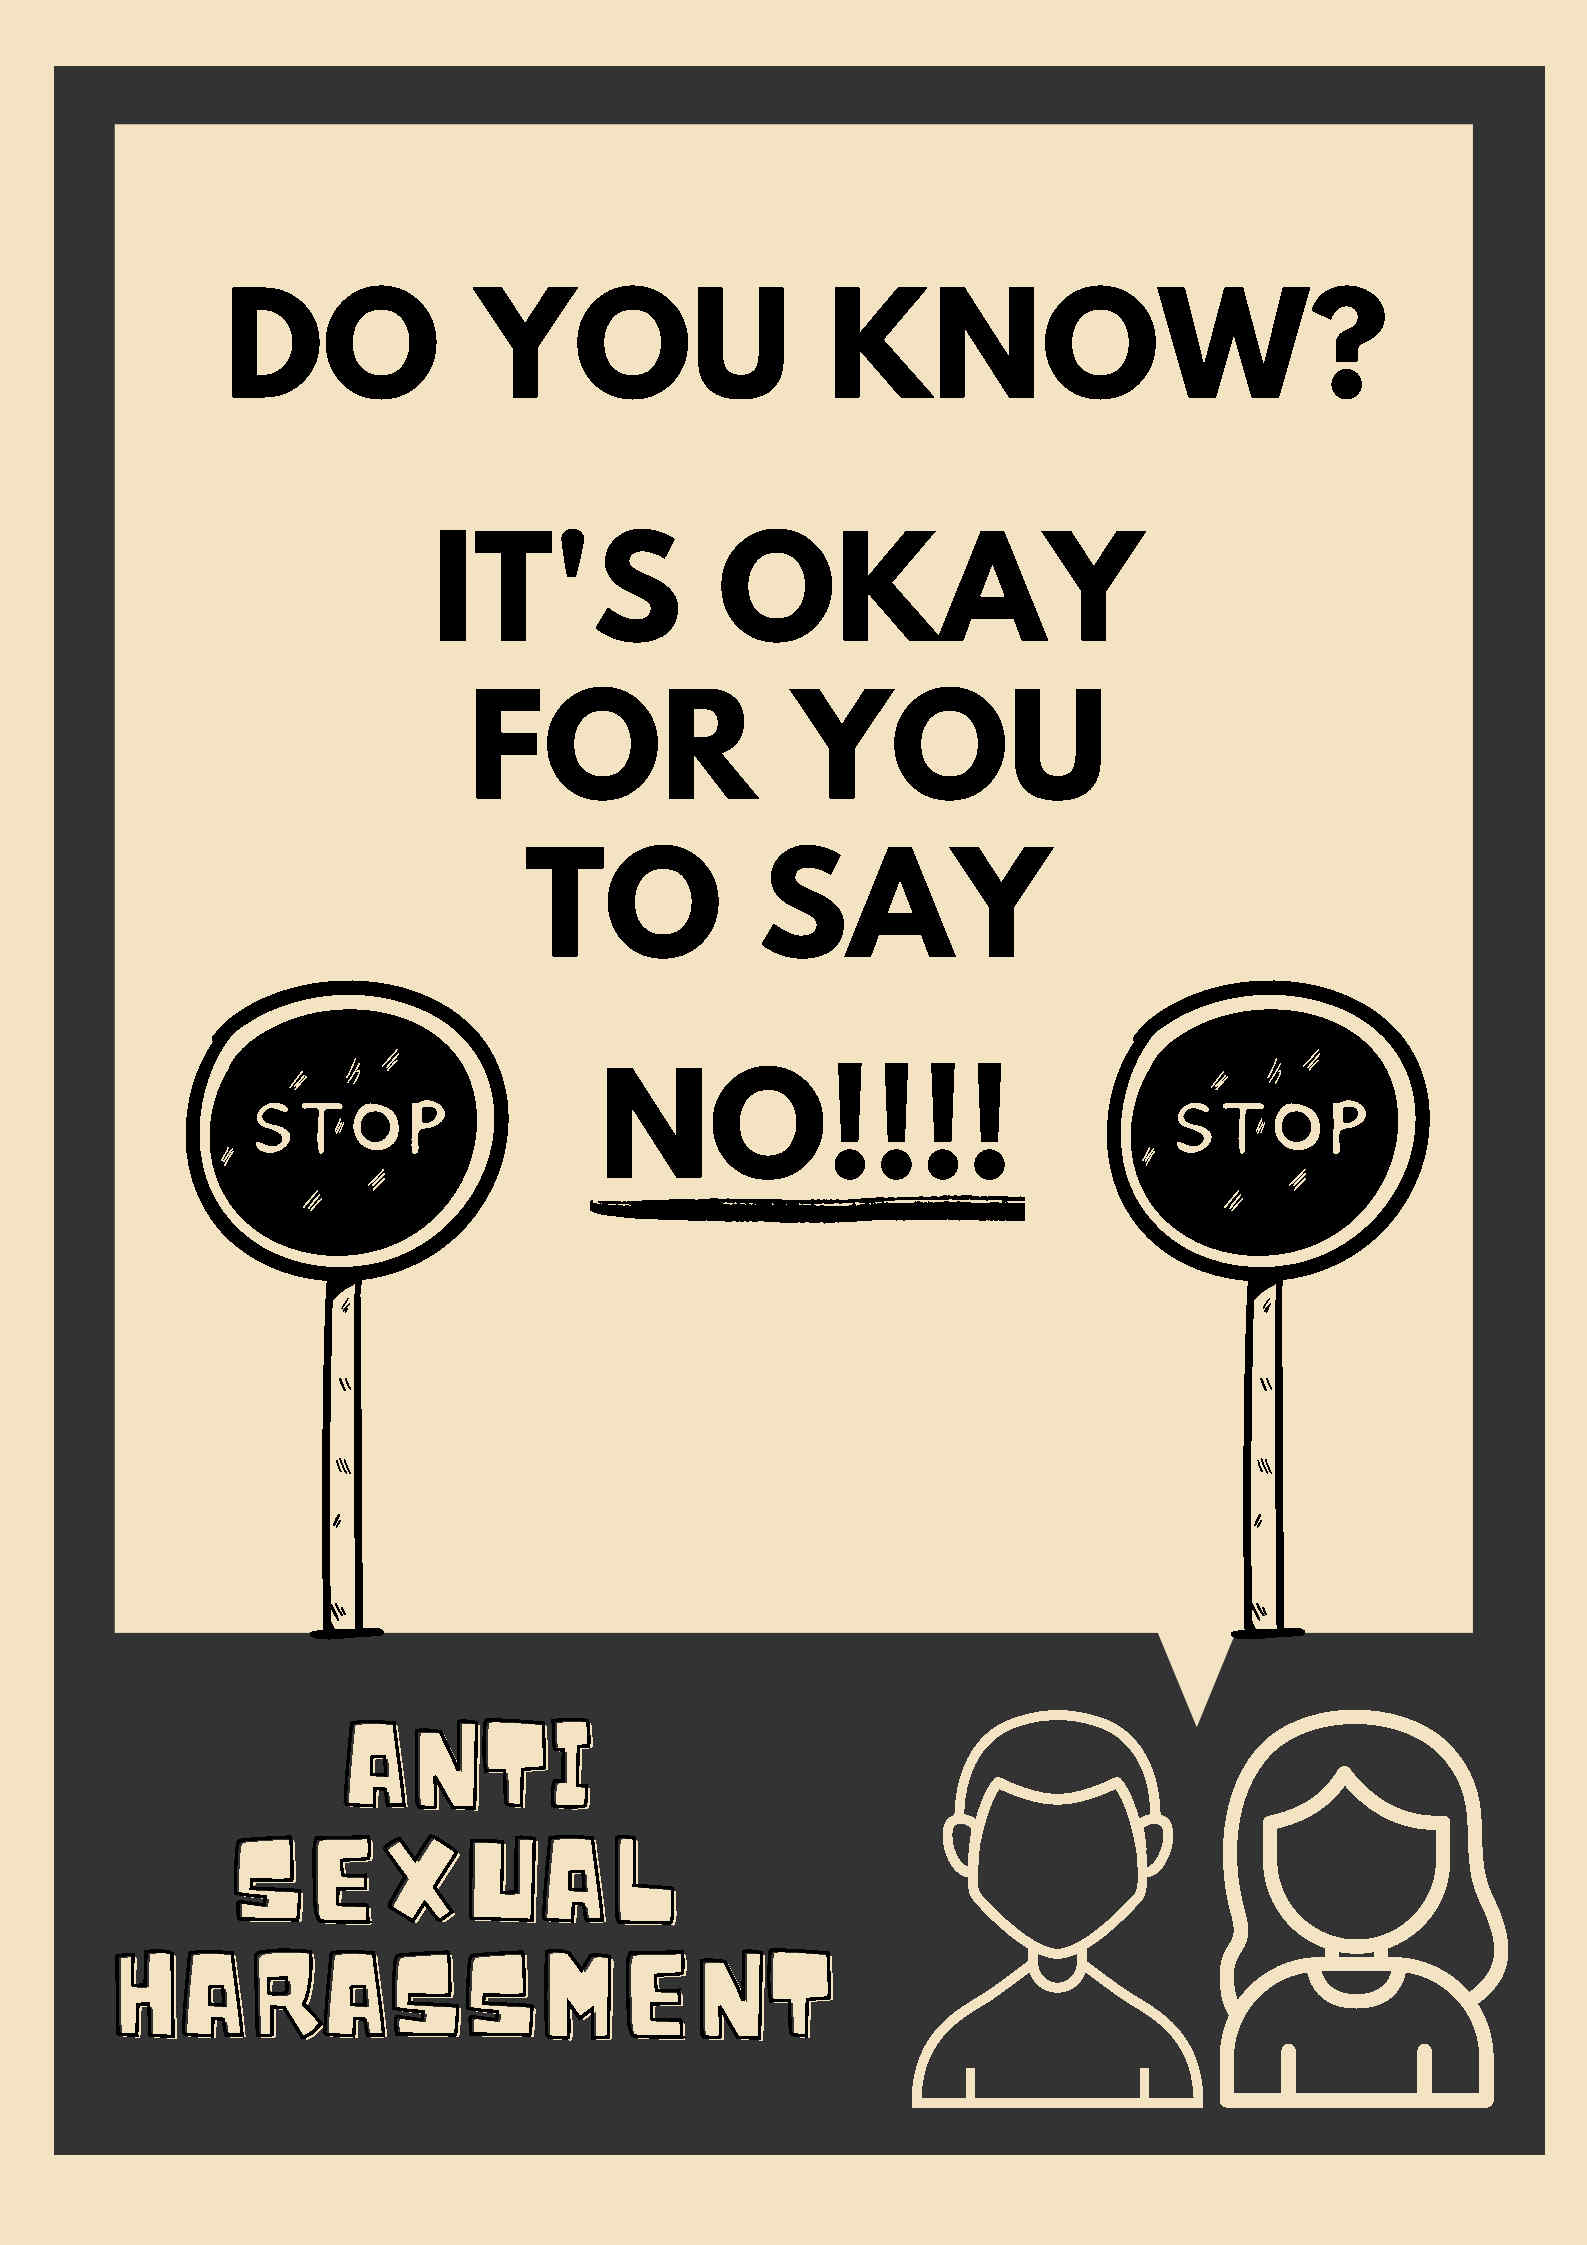 2nd Runner-up: It's okay for you to say no! (Description as the text on the webpage)